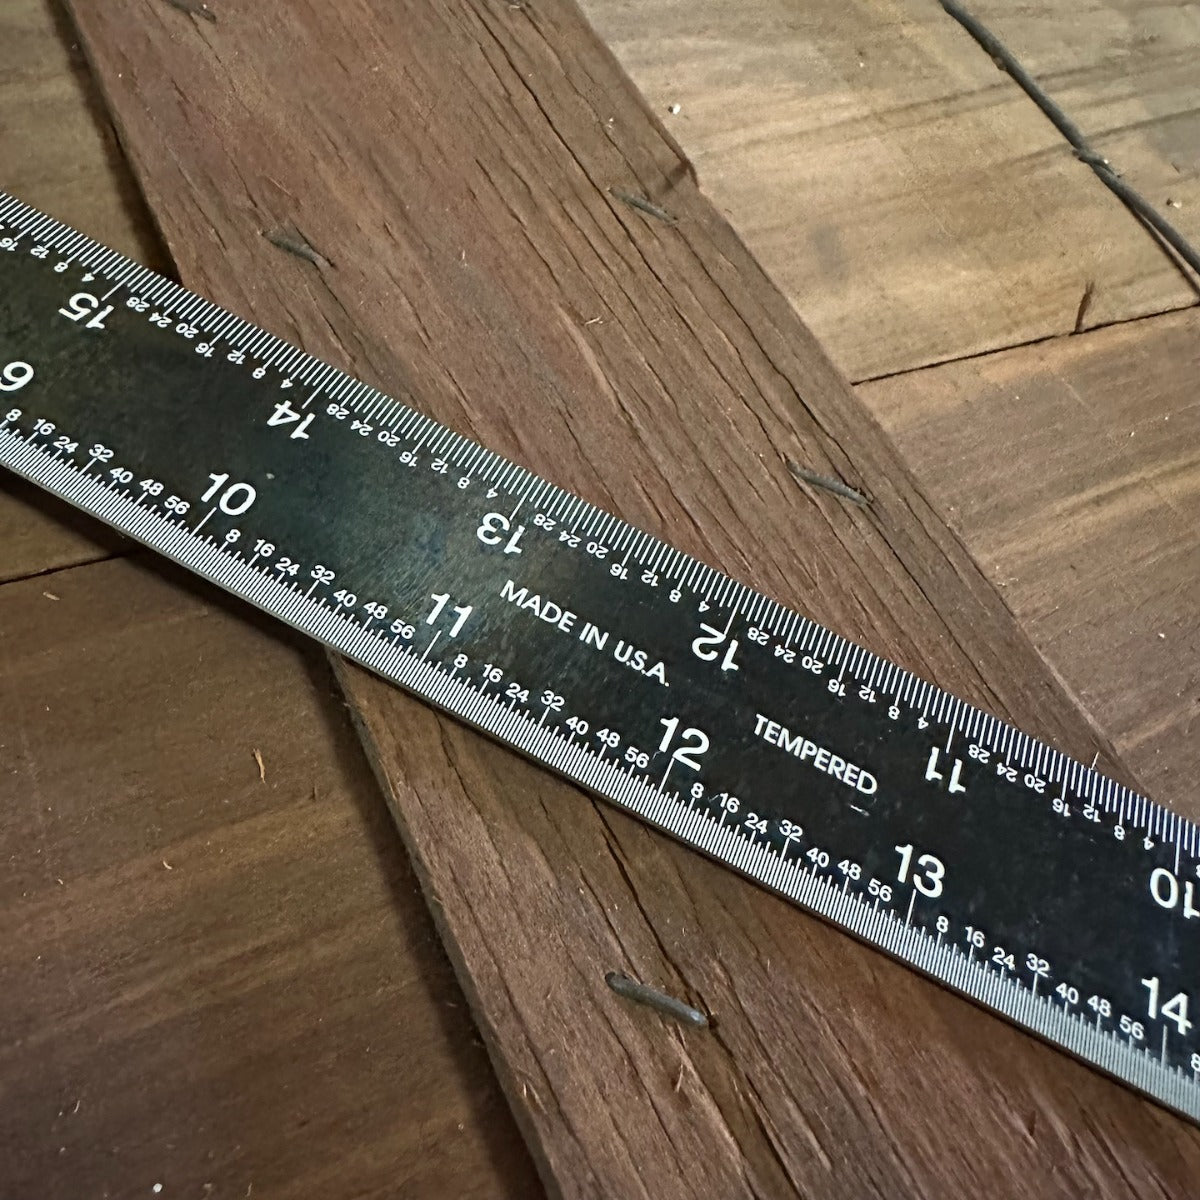 24" Products Engineering 4R Black EZ Read Tempered Ruler 8ths/16ths 32nds/64ths Cosmetic blemish, name removed(780062)